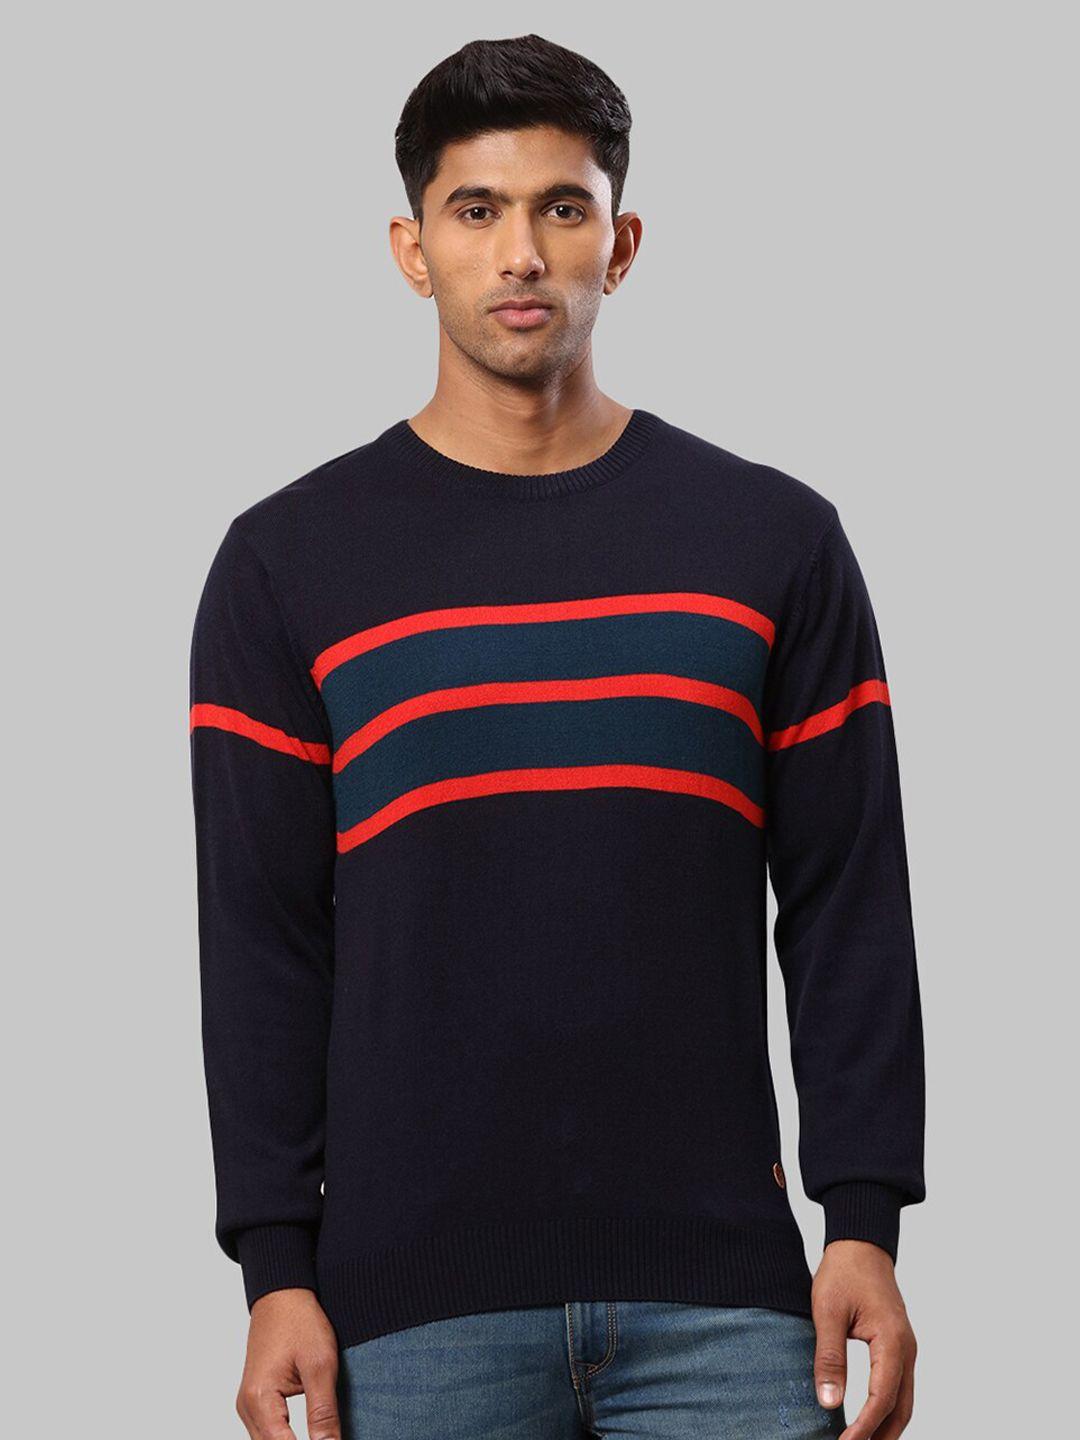 raymond-men-navy-blue-&-red-striped-pullover-sweater